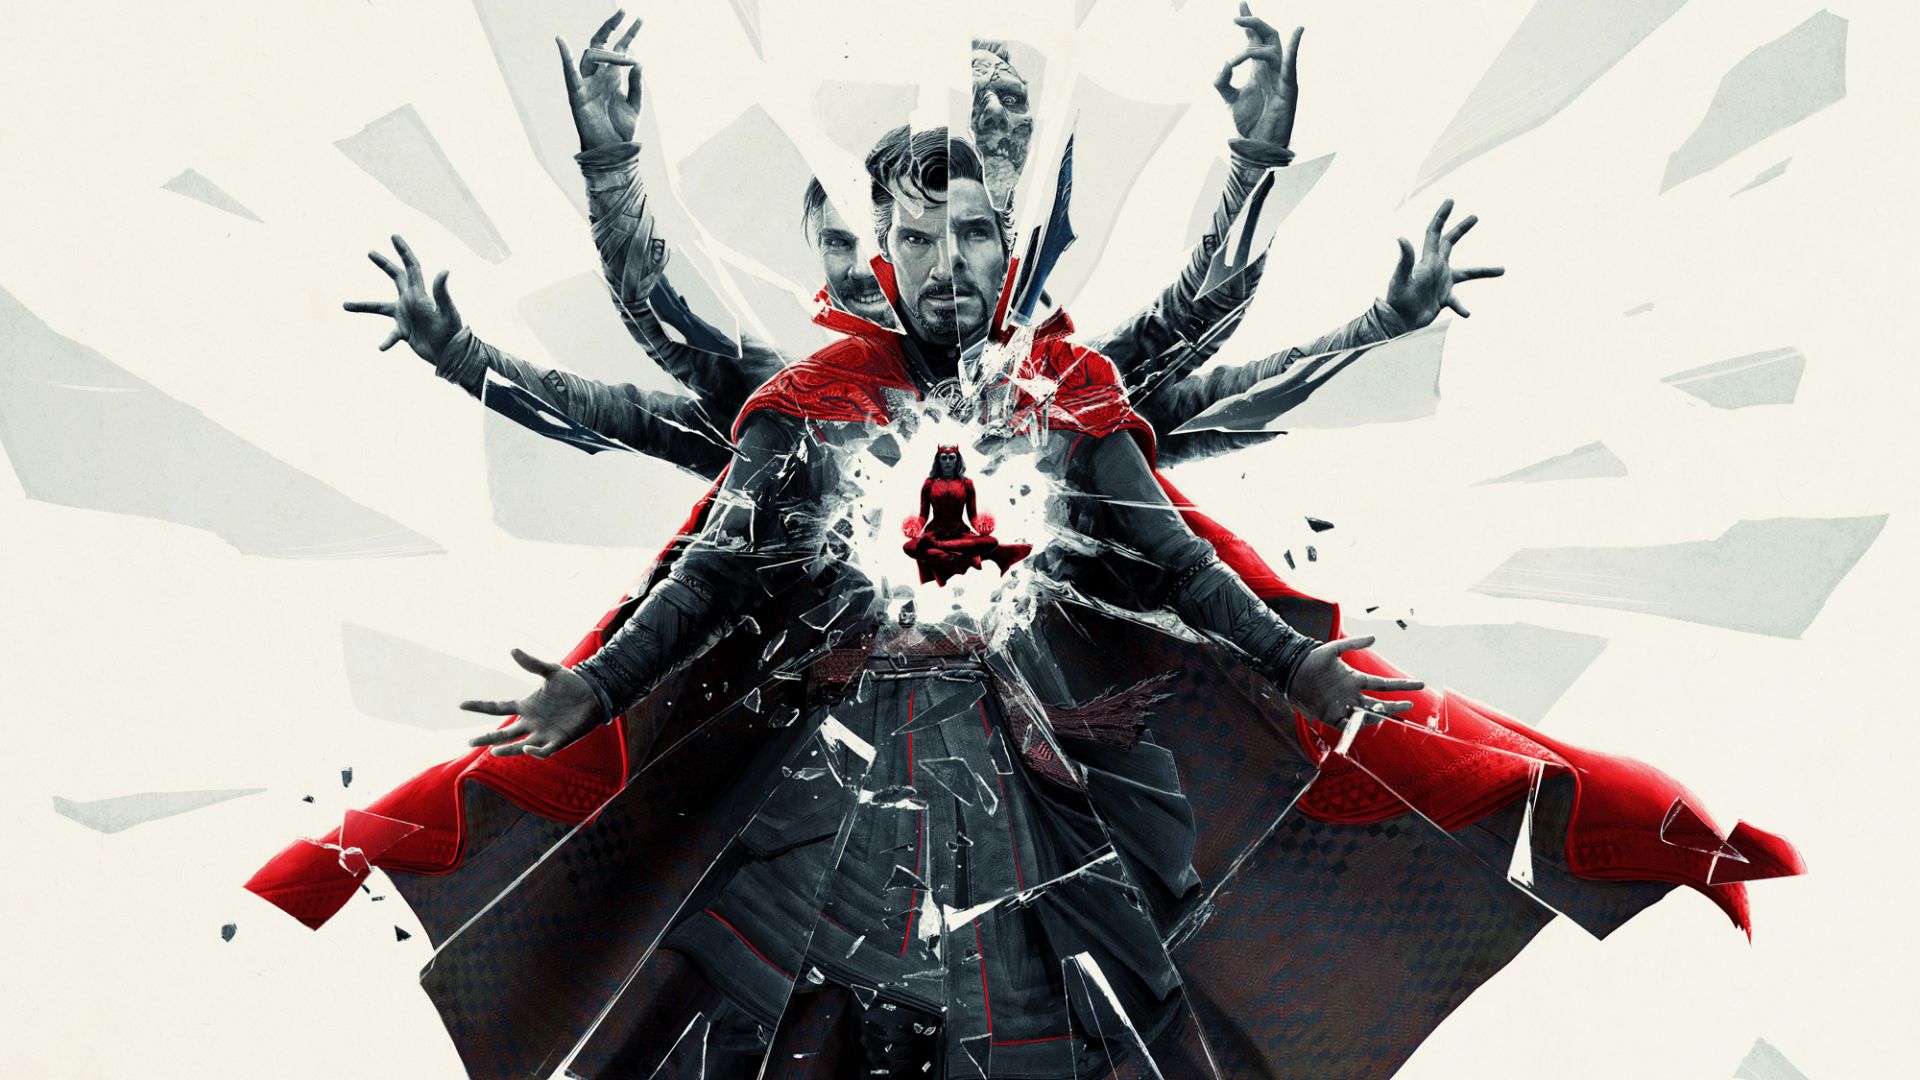 Desktop Wallpaper Poster, Doctor Strange In The Multiverse Of Madness,  2022, Hd Image, Picture, Background, 6a400c